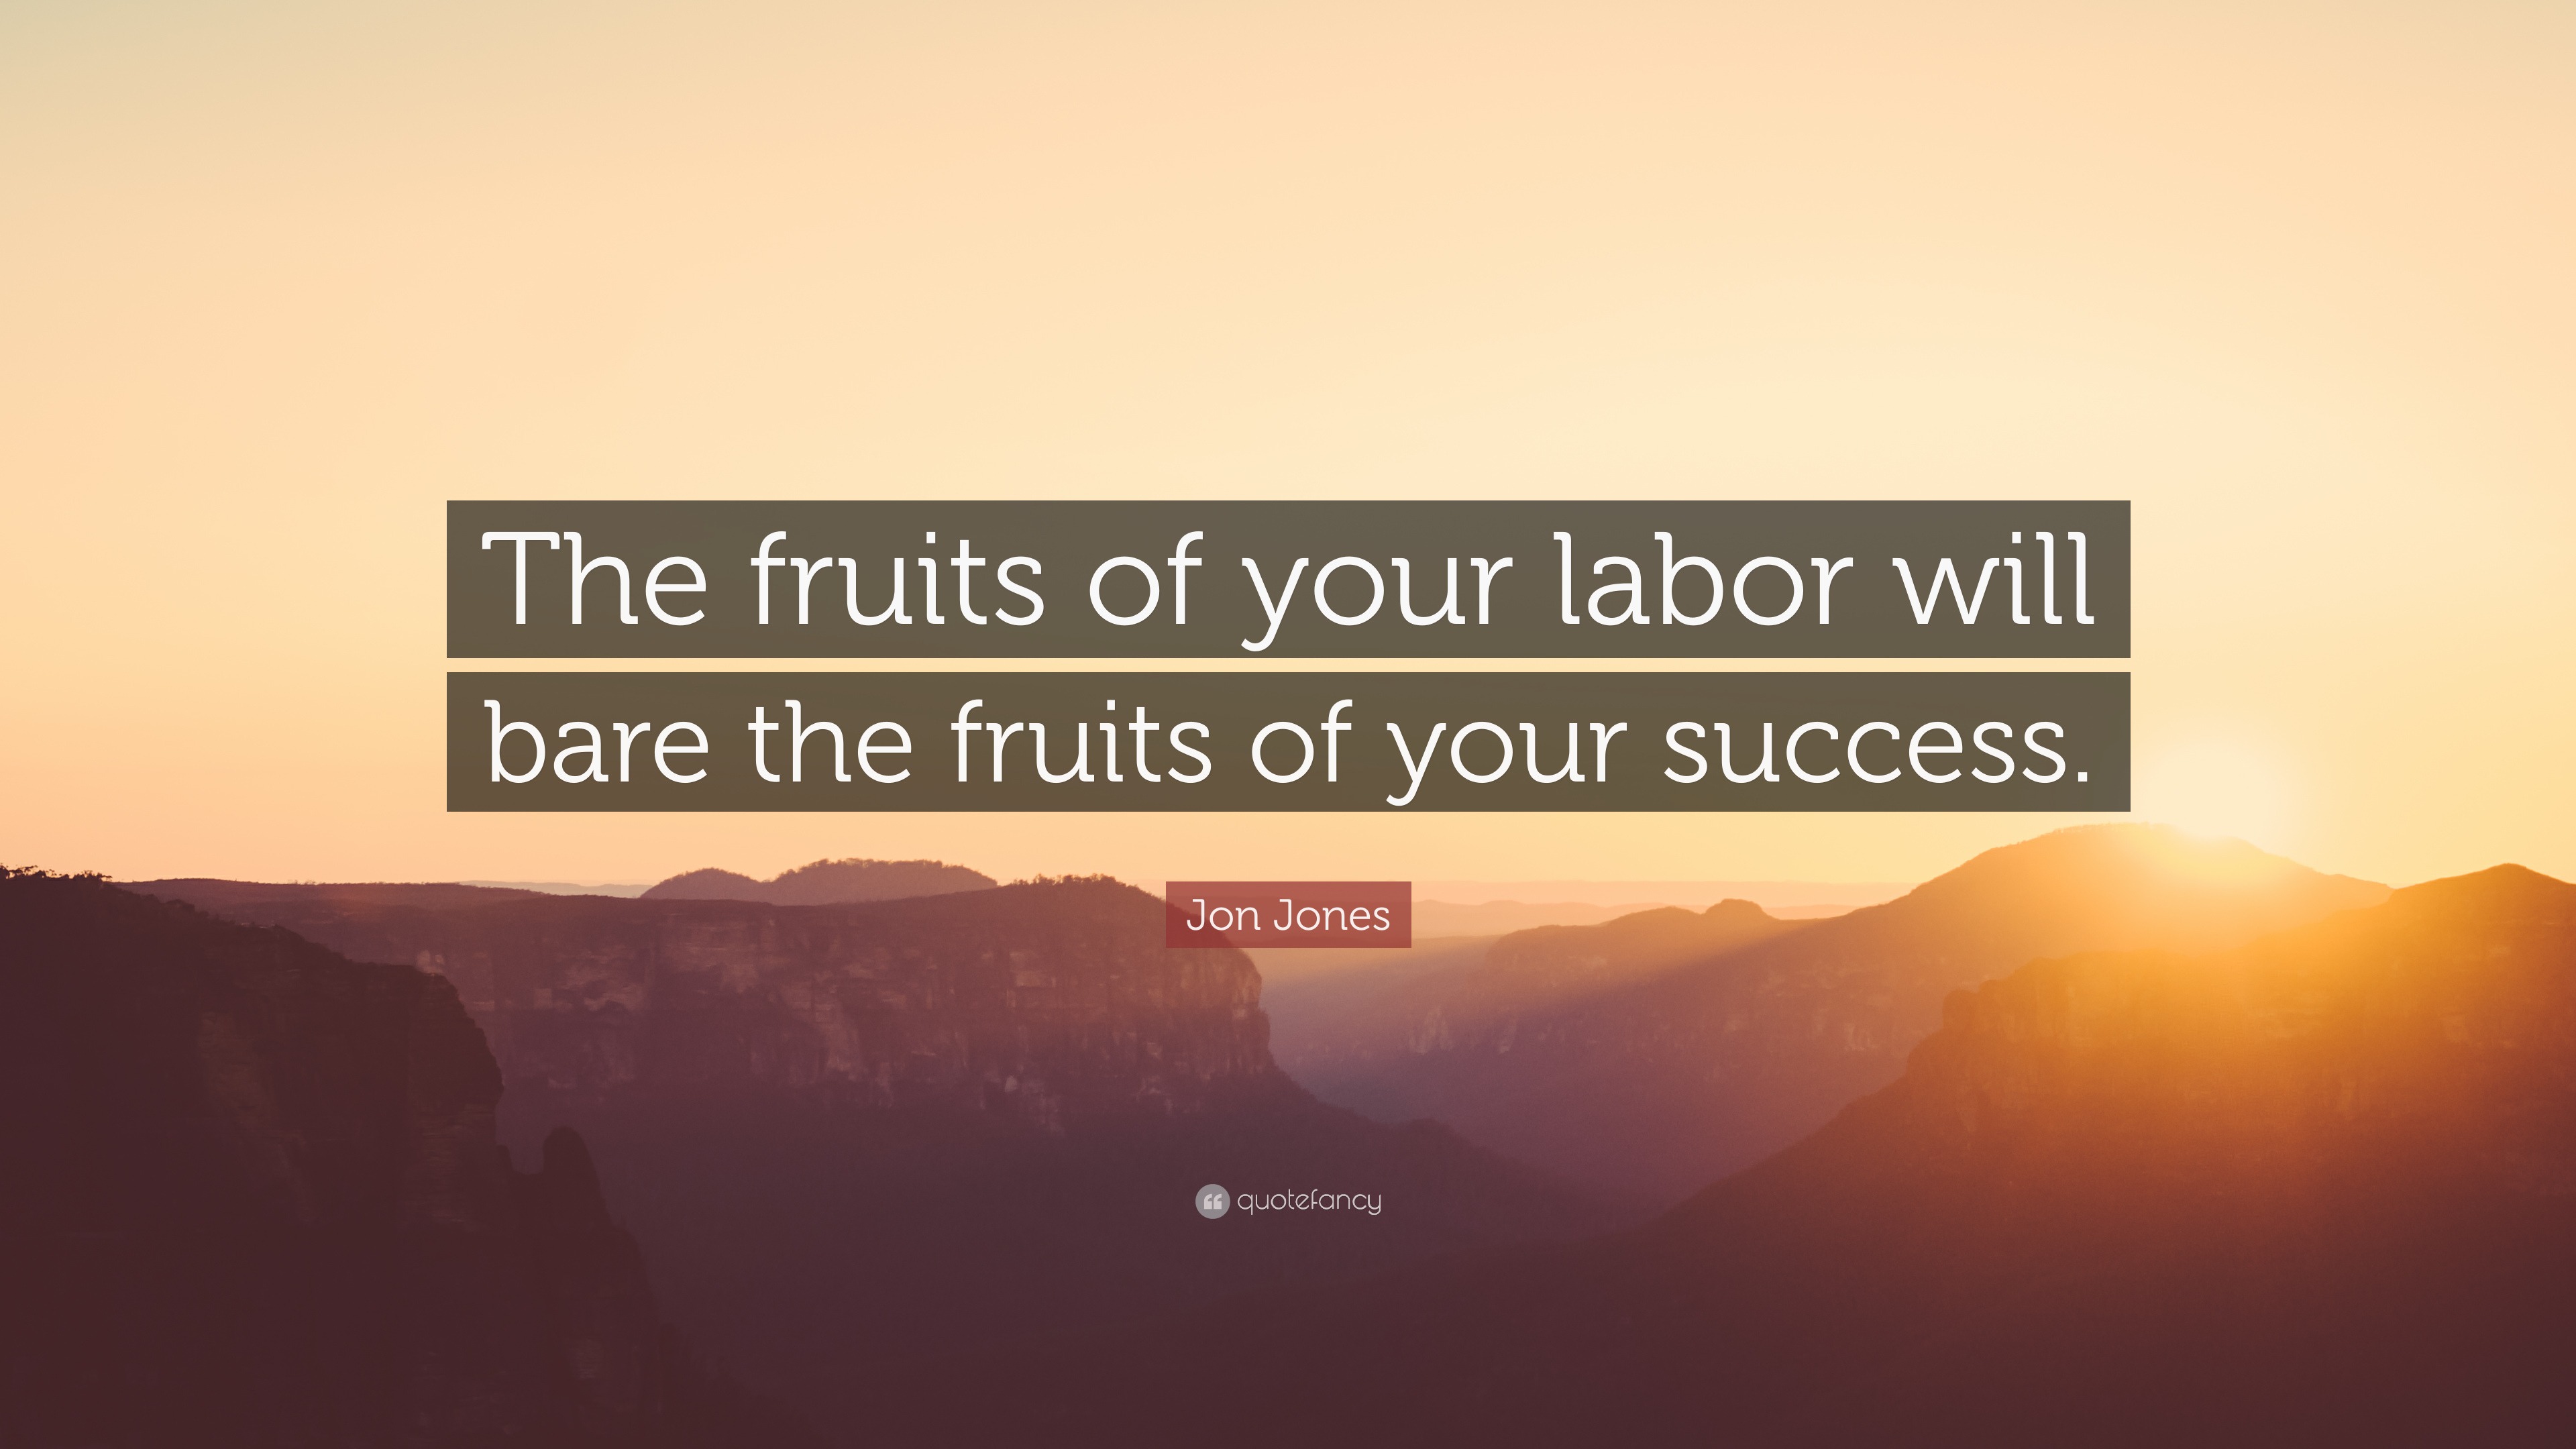 jackin-fruits-of-your-labor-quote